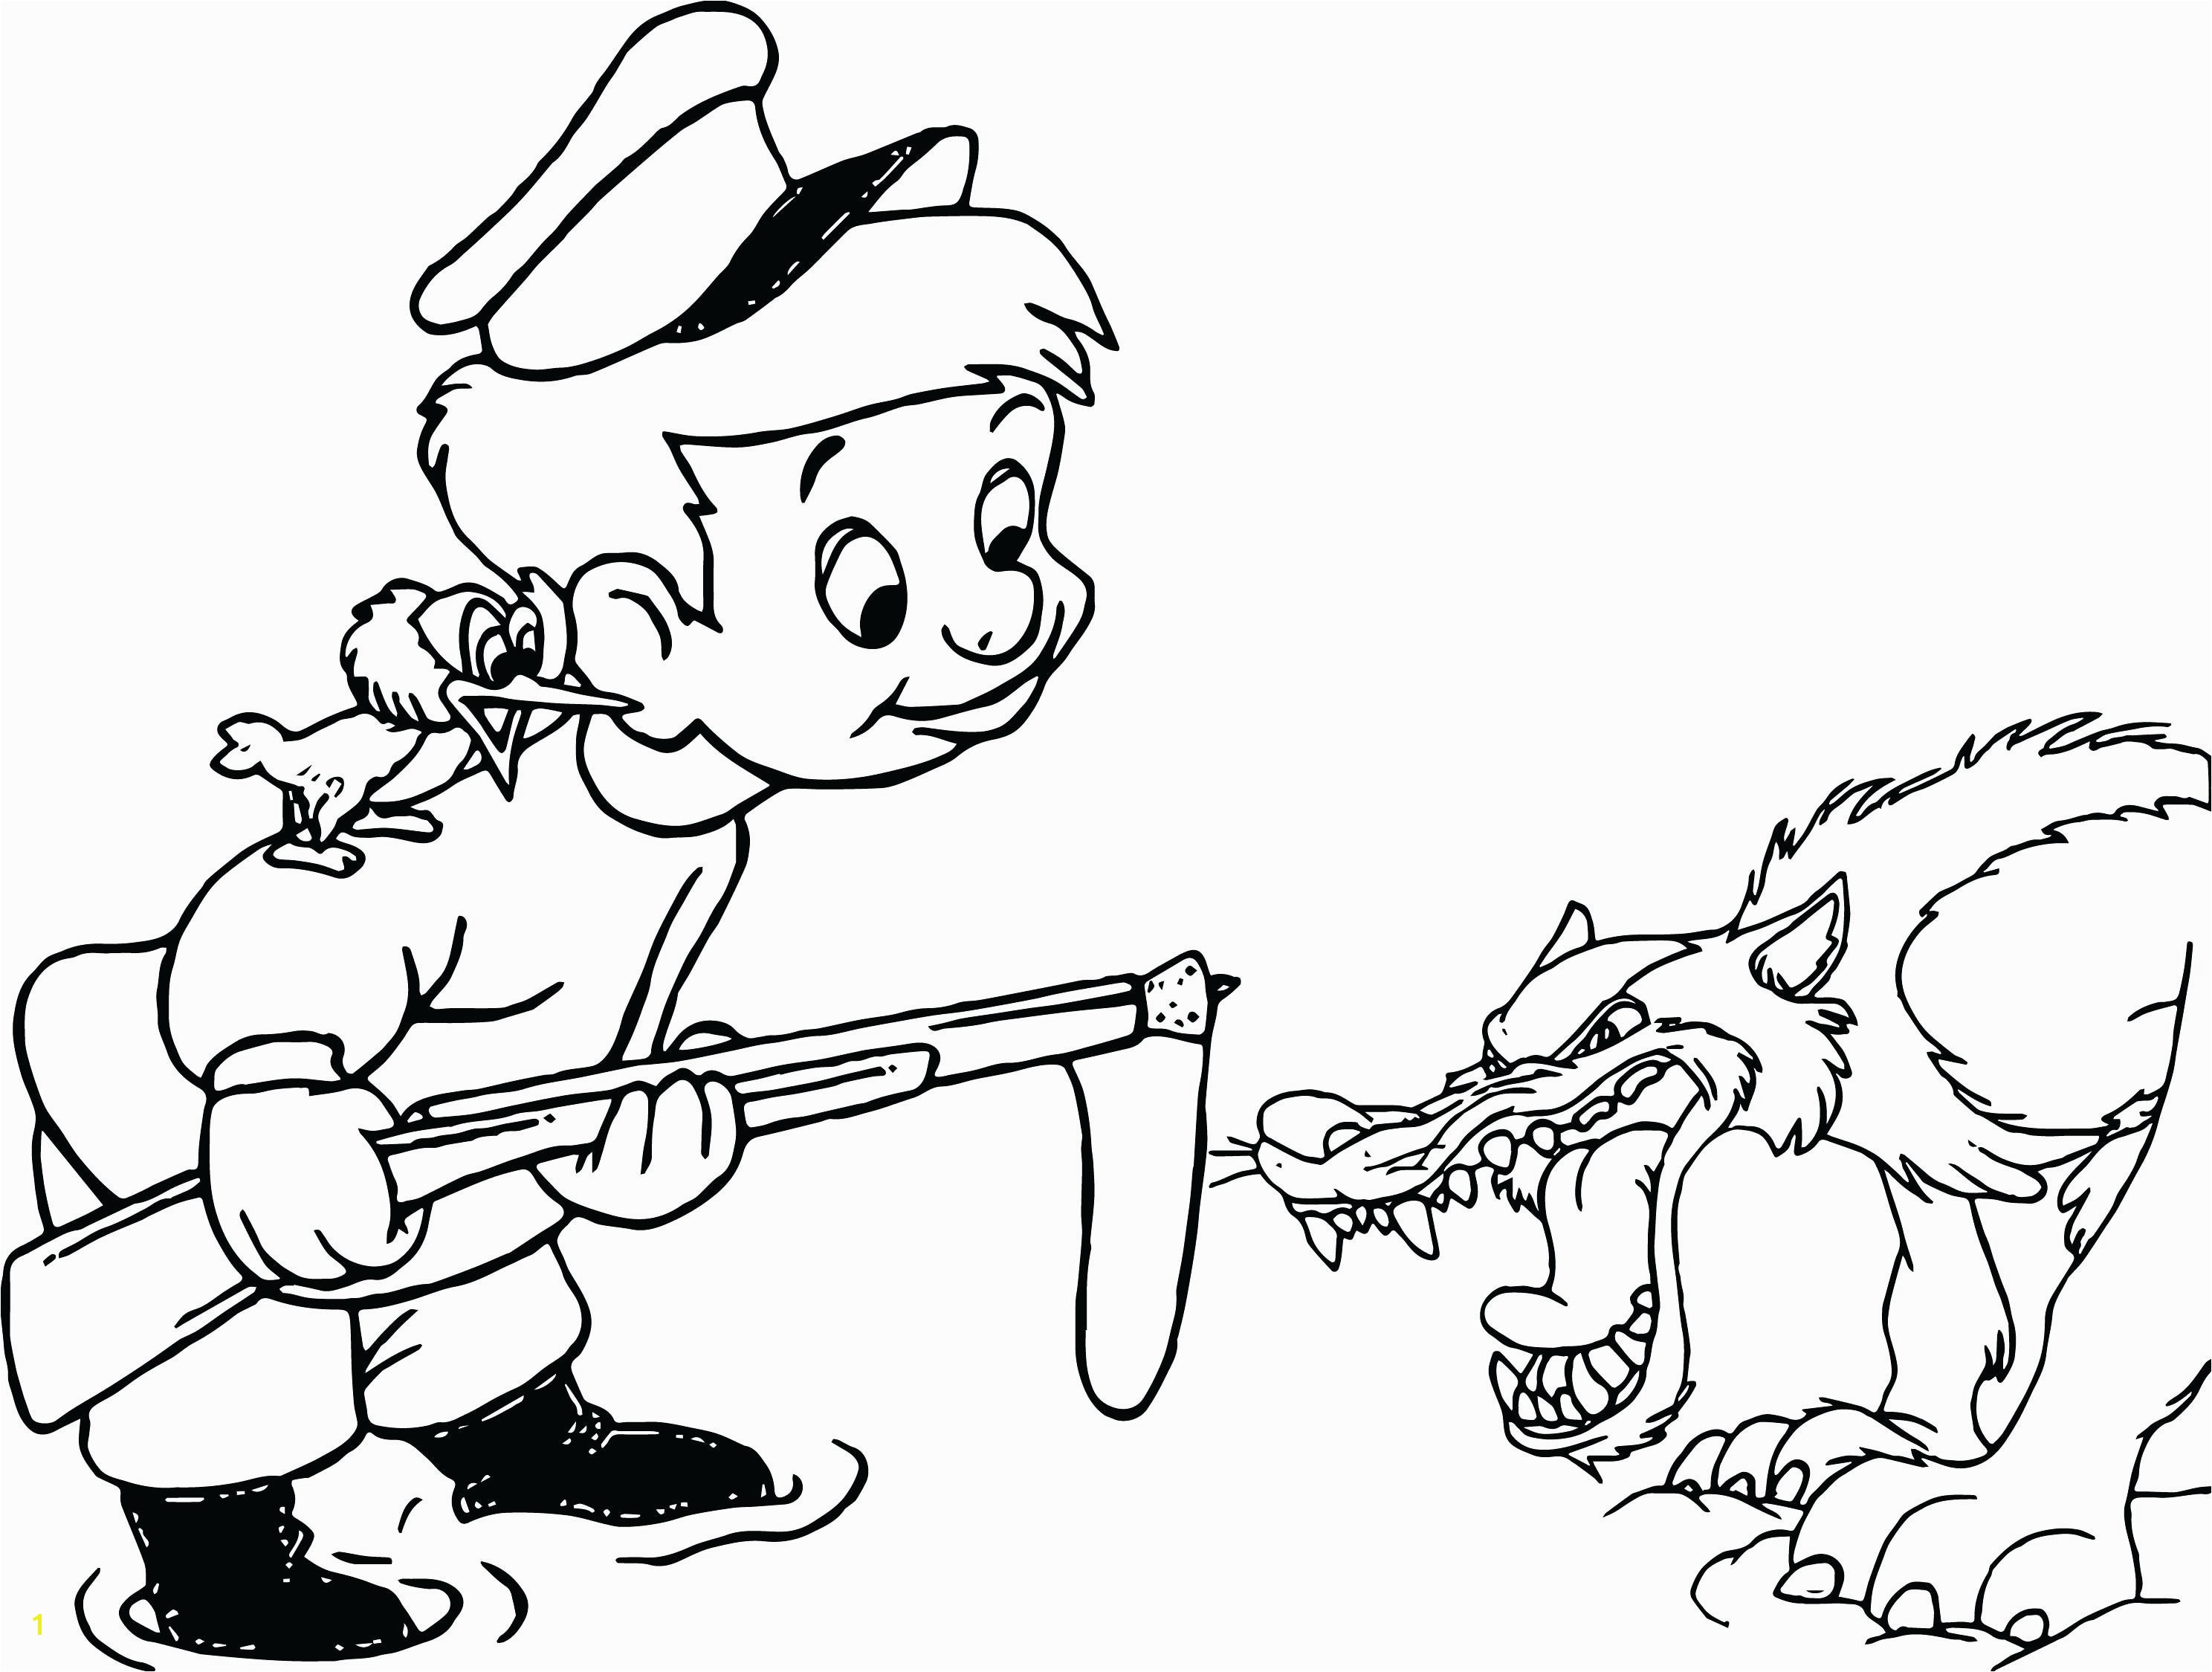 Peter and the Wolf Coloring Page Peter and the Wolf Coloring Pages Gallery